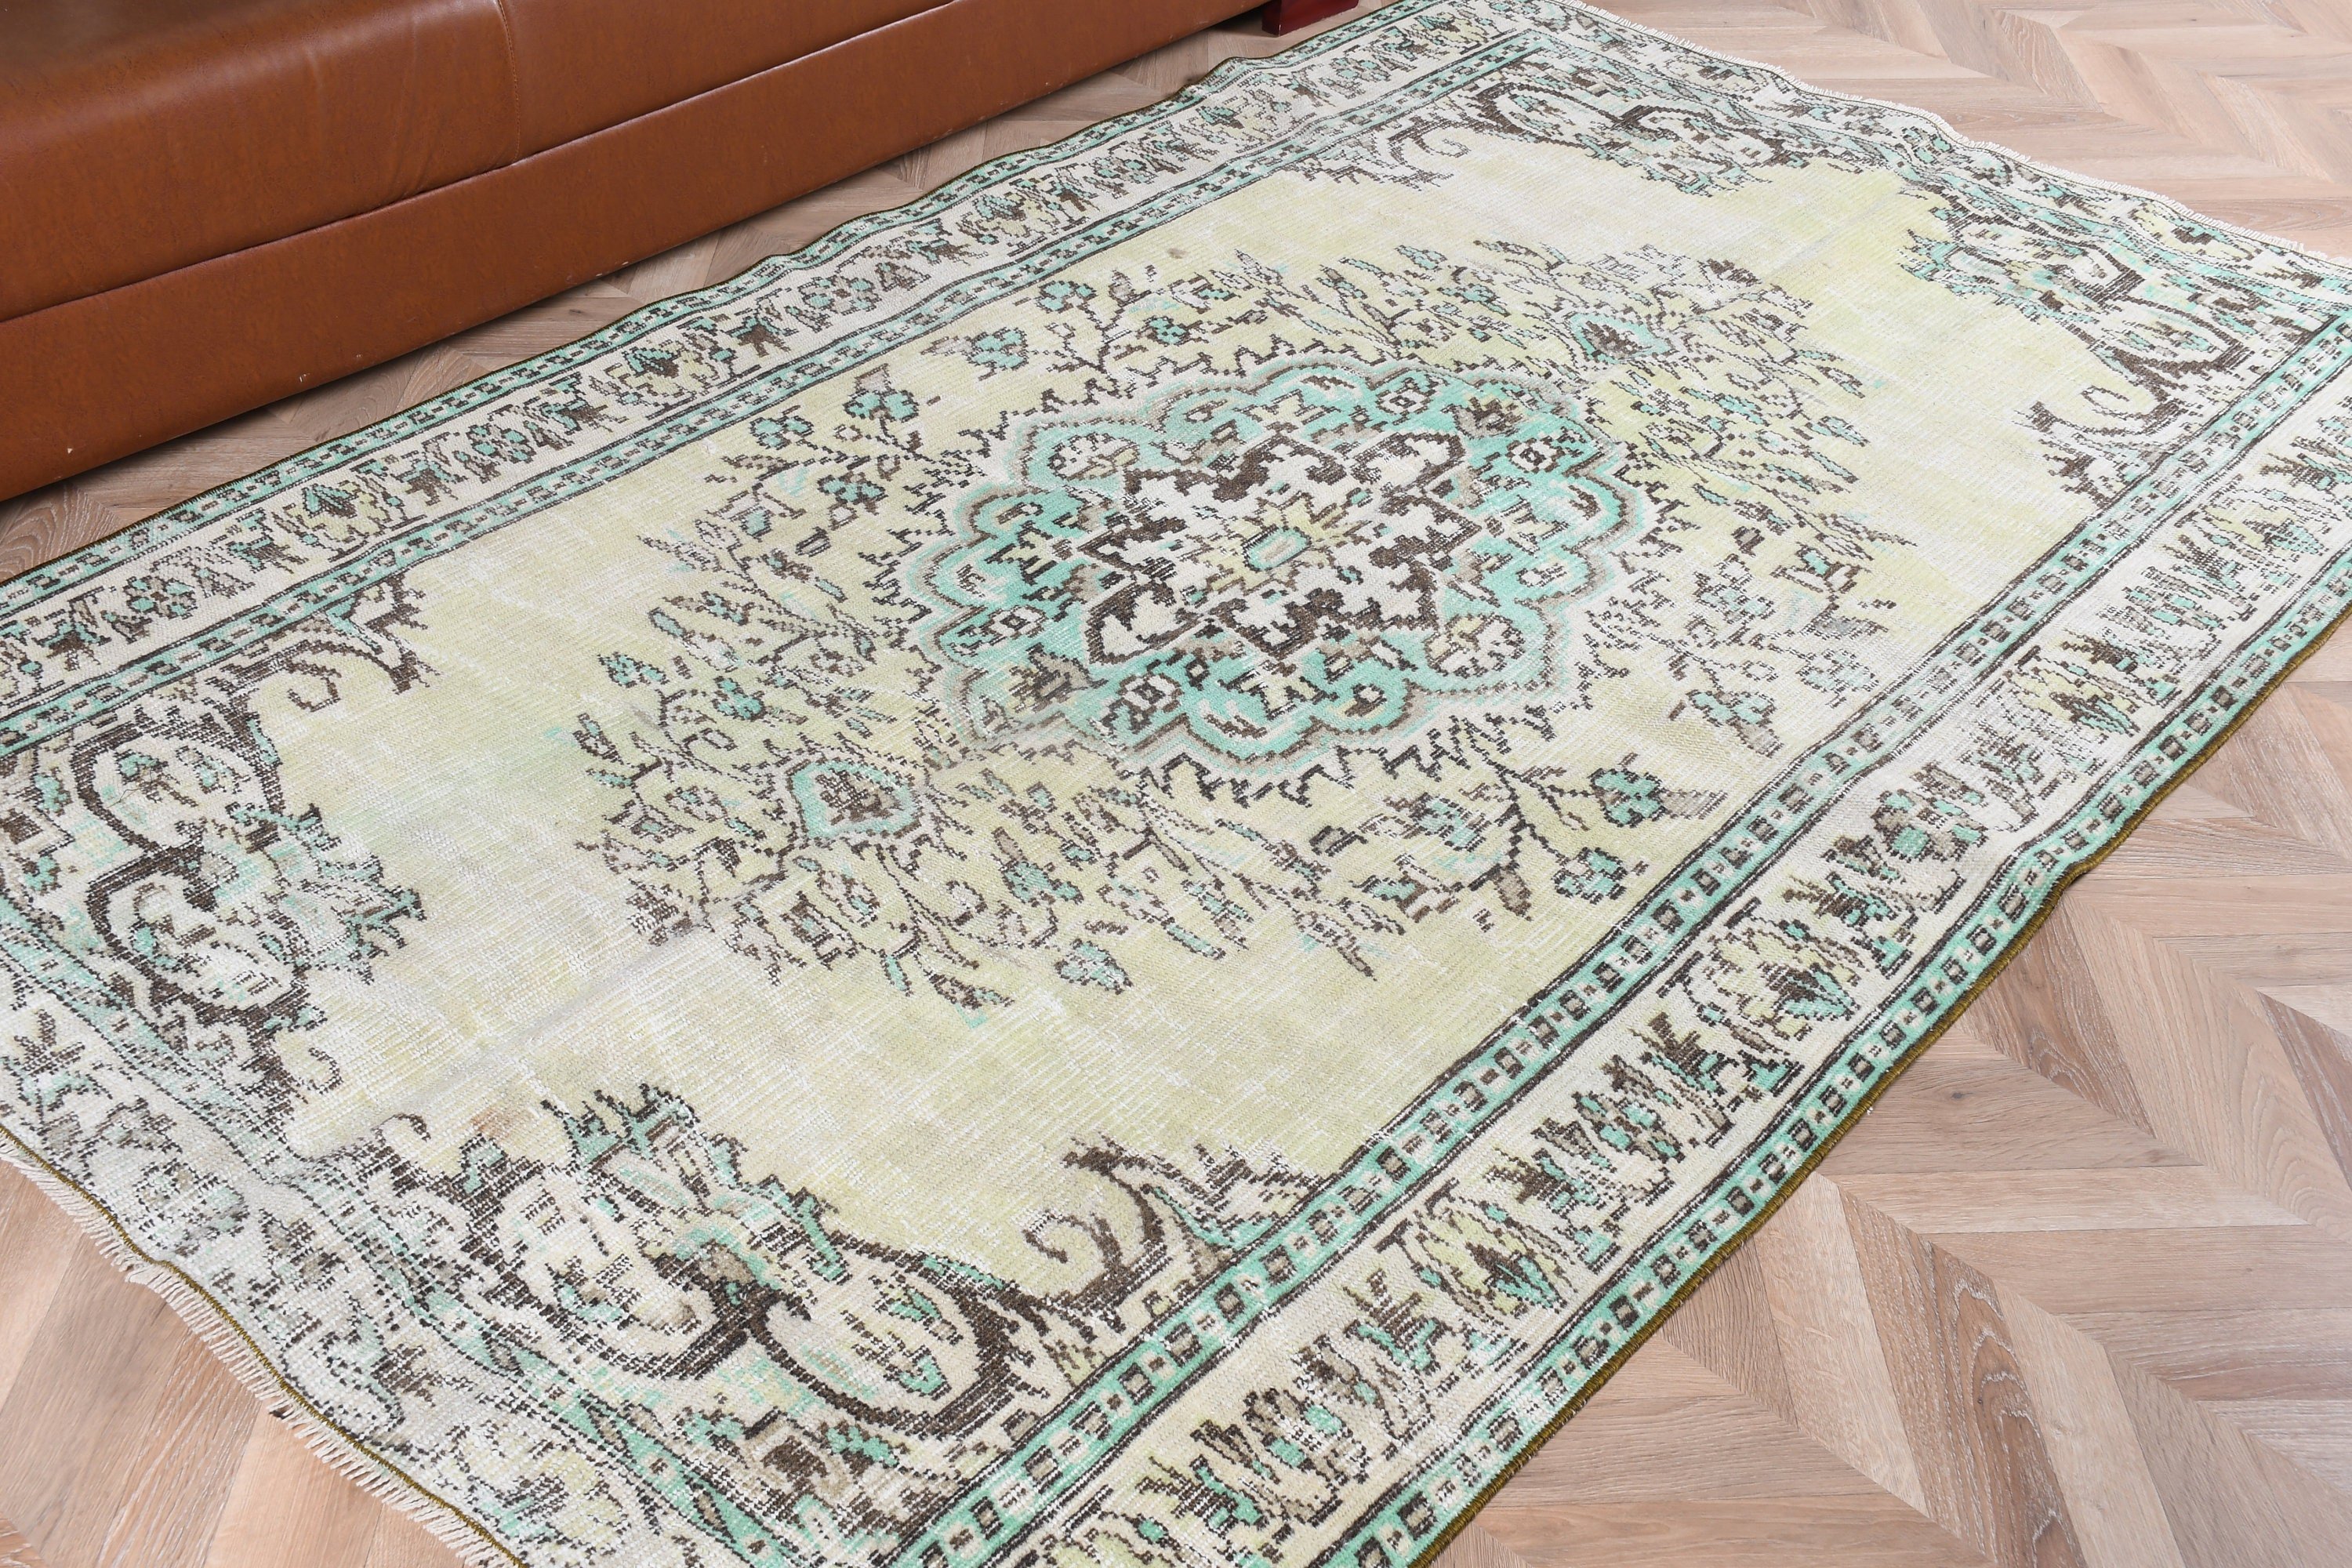 Turkish Rug, Bedroom Rugs, Green Home Decor Rug, Kitchen Rugs, Wedding Rug, 4.9x7.6 ft Area Rug, Cool Rugs, Rugs for Area, Vintage Rugs